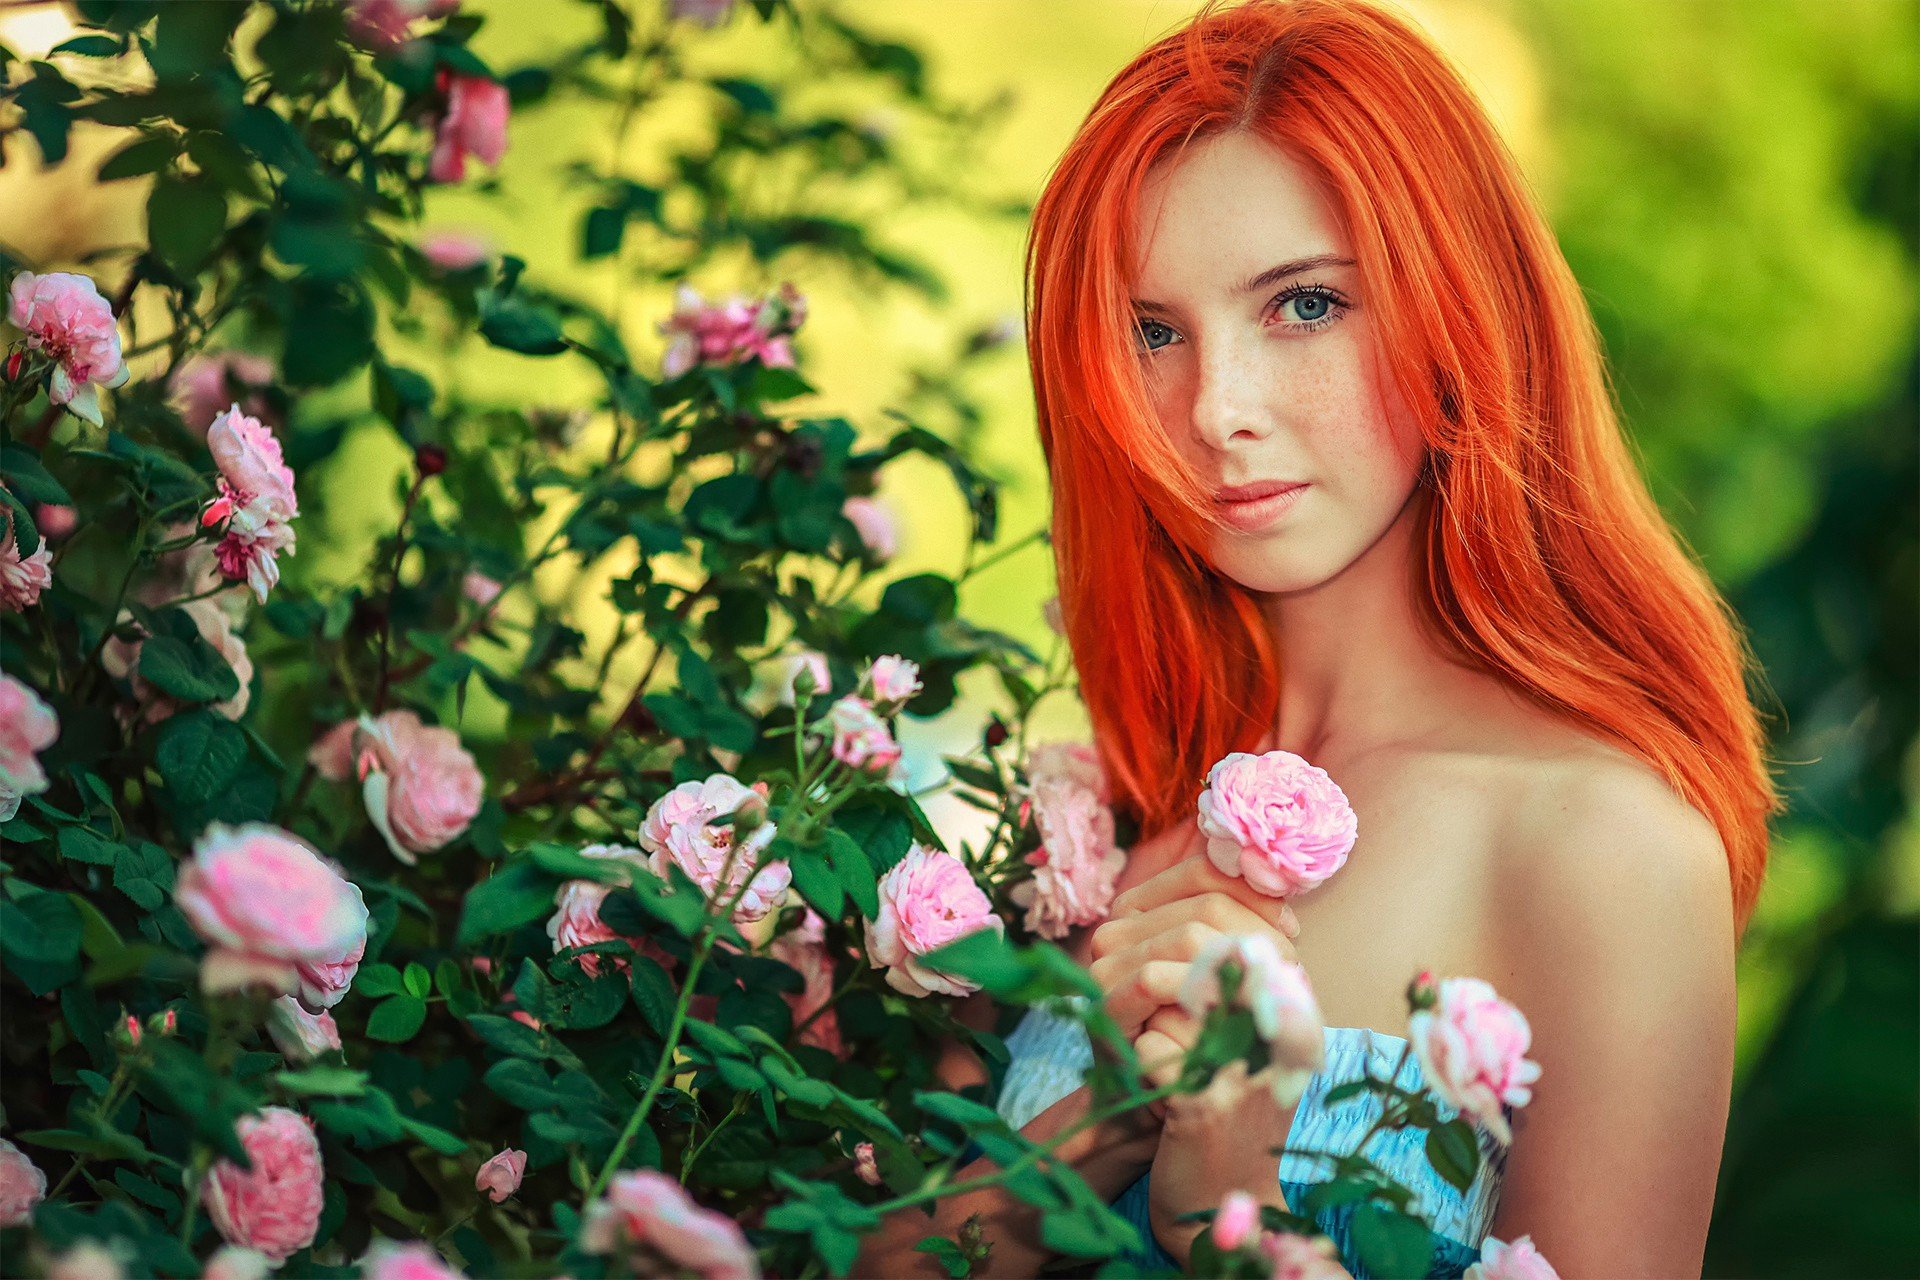 Women Model Redhead Flowers Hd Wallpapers Desktop And Mobile Images And Photos